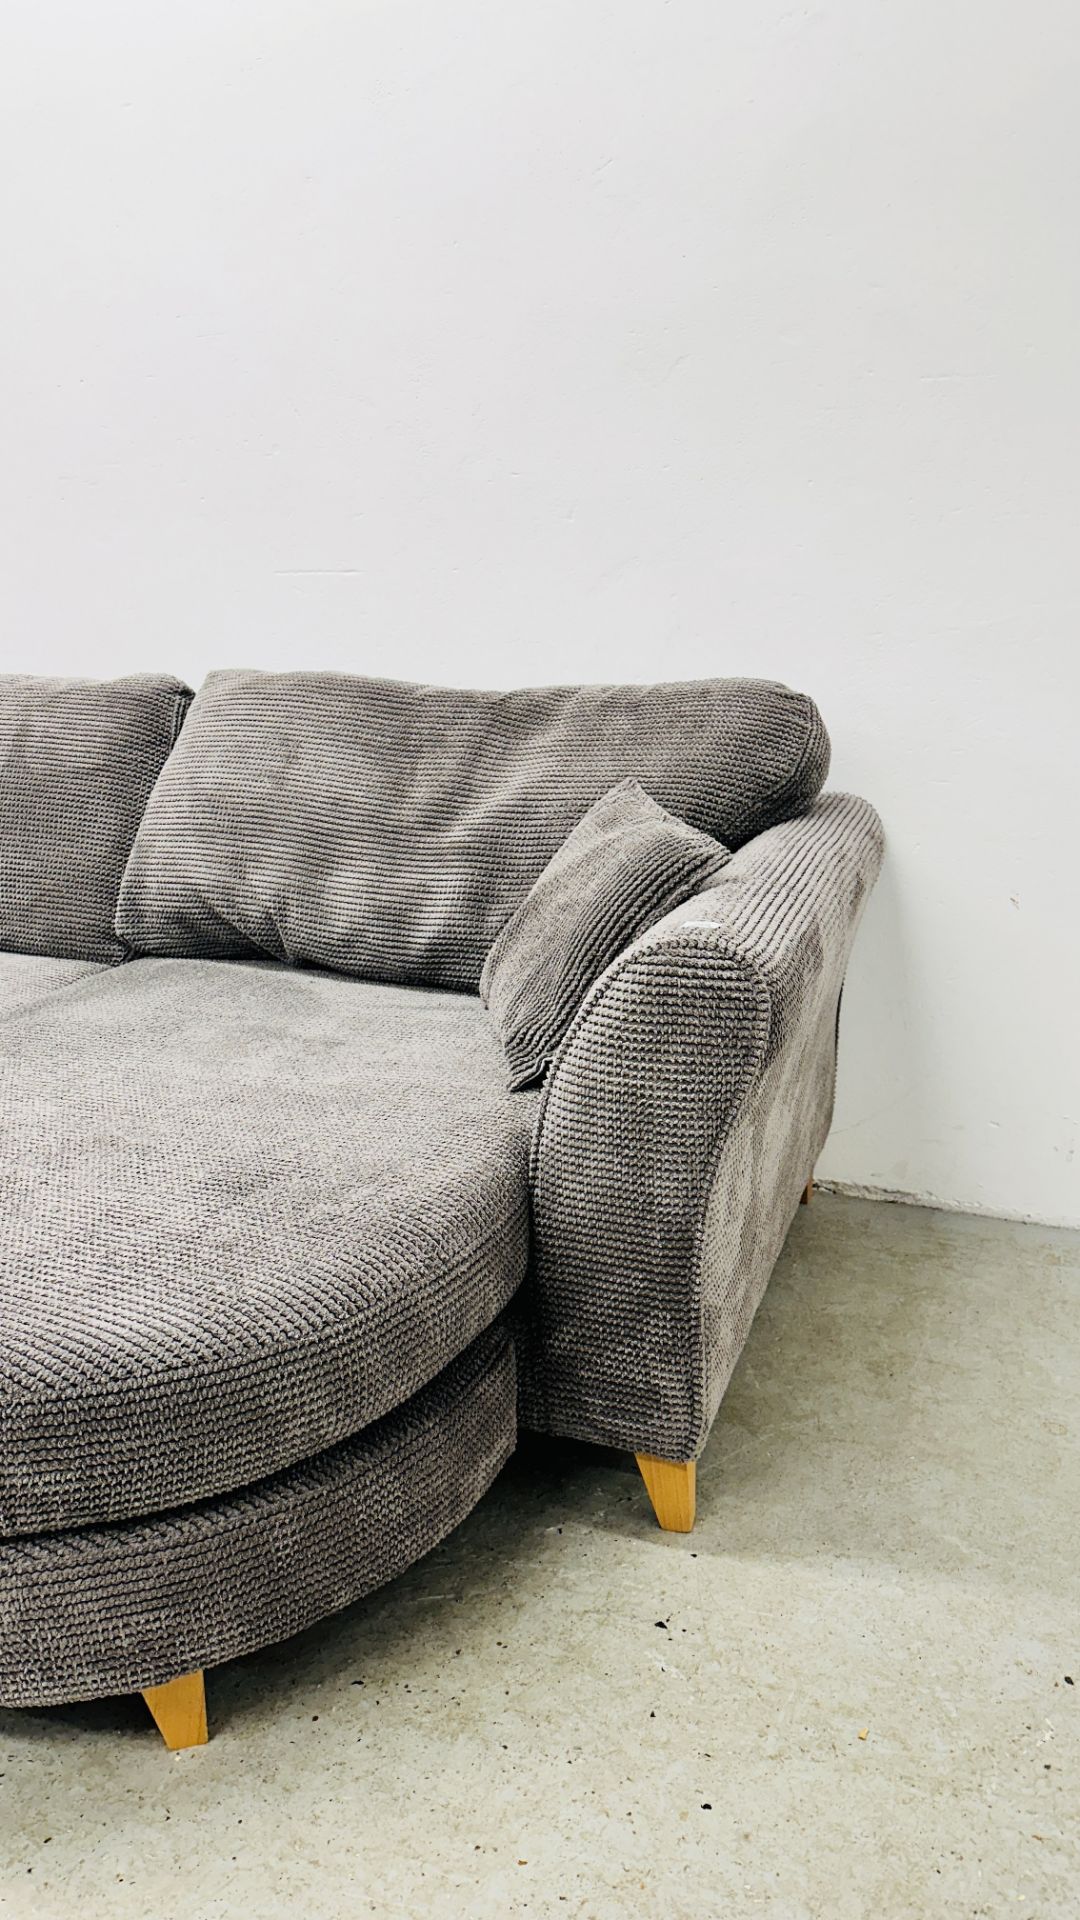 GOOD QUALITY DFS CORNER SOFA UPHOLSTERED IN CHARCOAL GREY. - Image 7 of 10